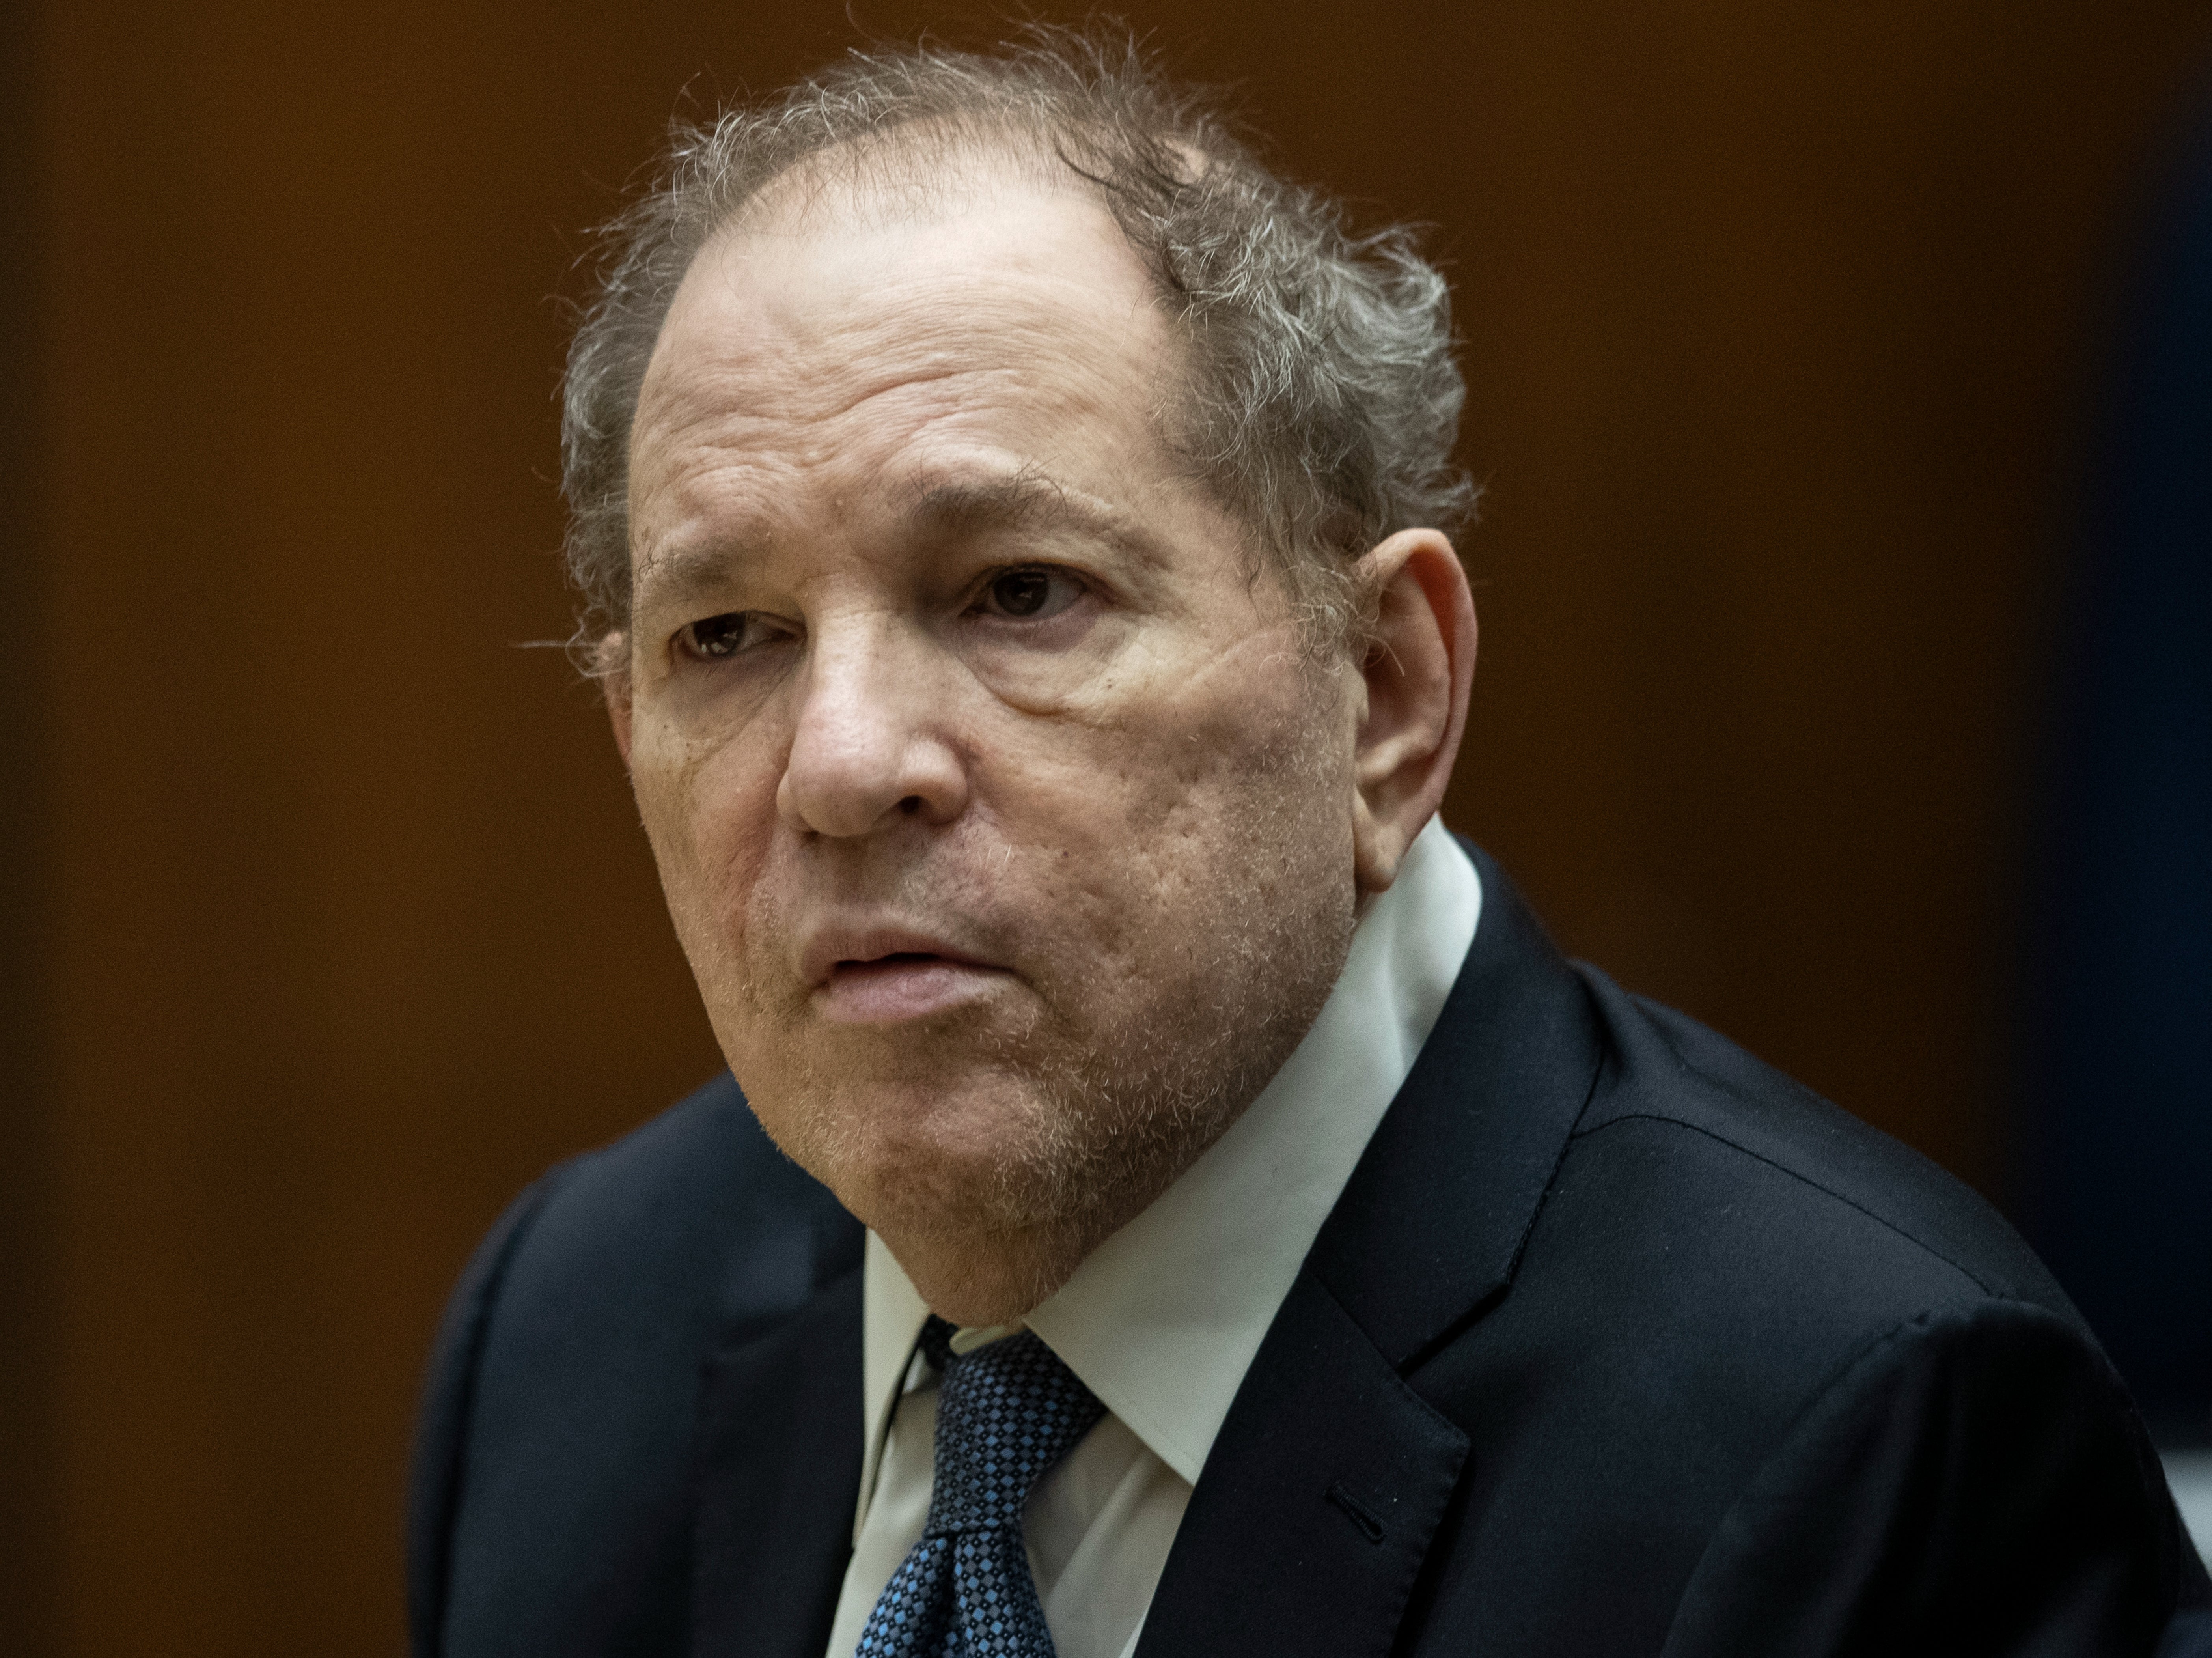 Harvey Weinstein appears in court on 4 October 2022 in Los Angeles, California